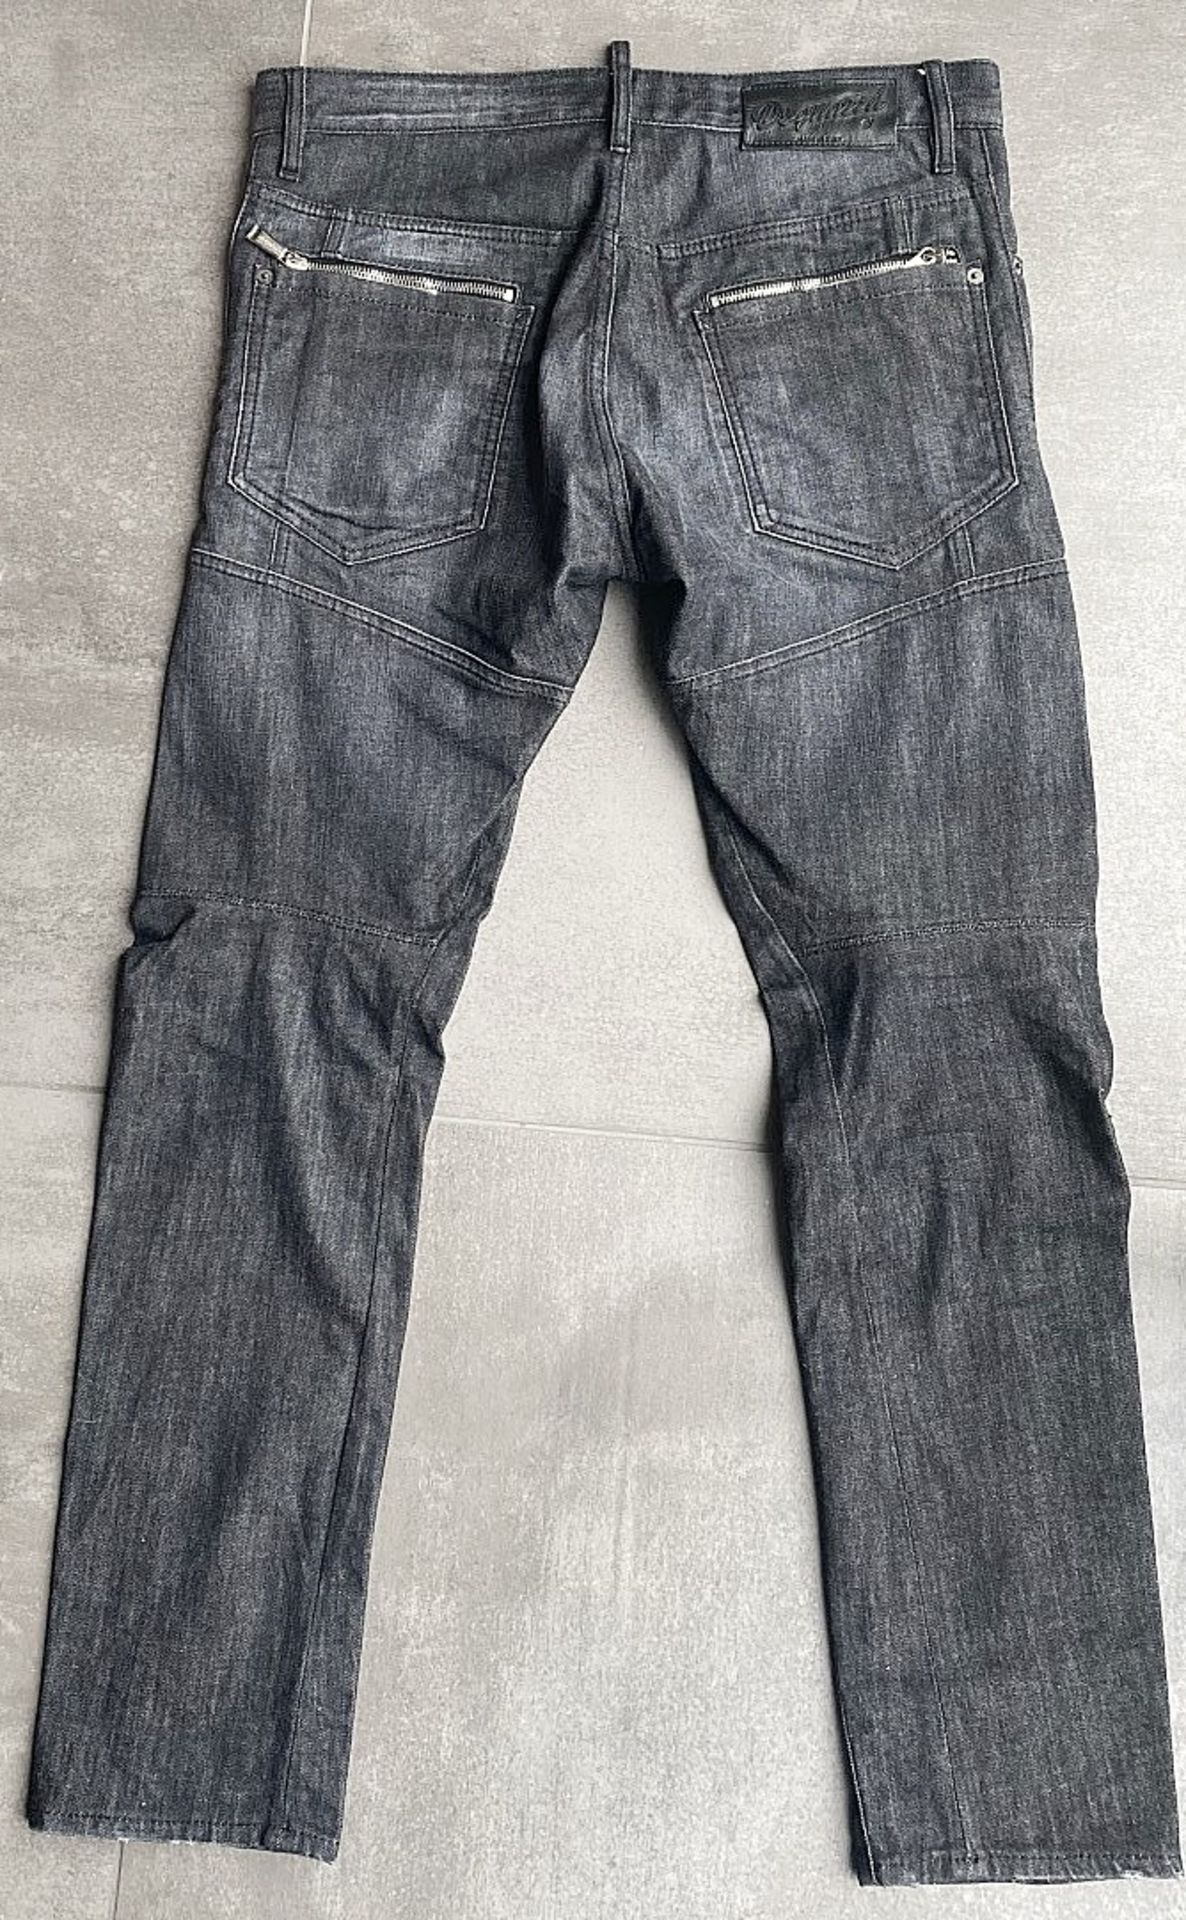 1 x Pair Of Men's Genuine Dsquared2 Distressed-Style Jeans In Washed Black - Waist Size: EU48 / UK30 - Image 5 of 8